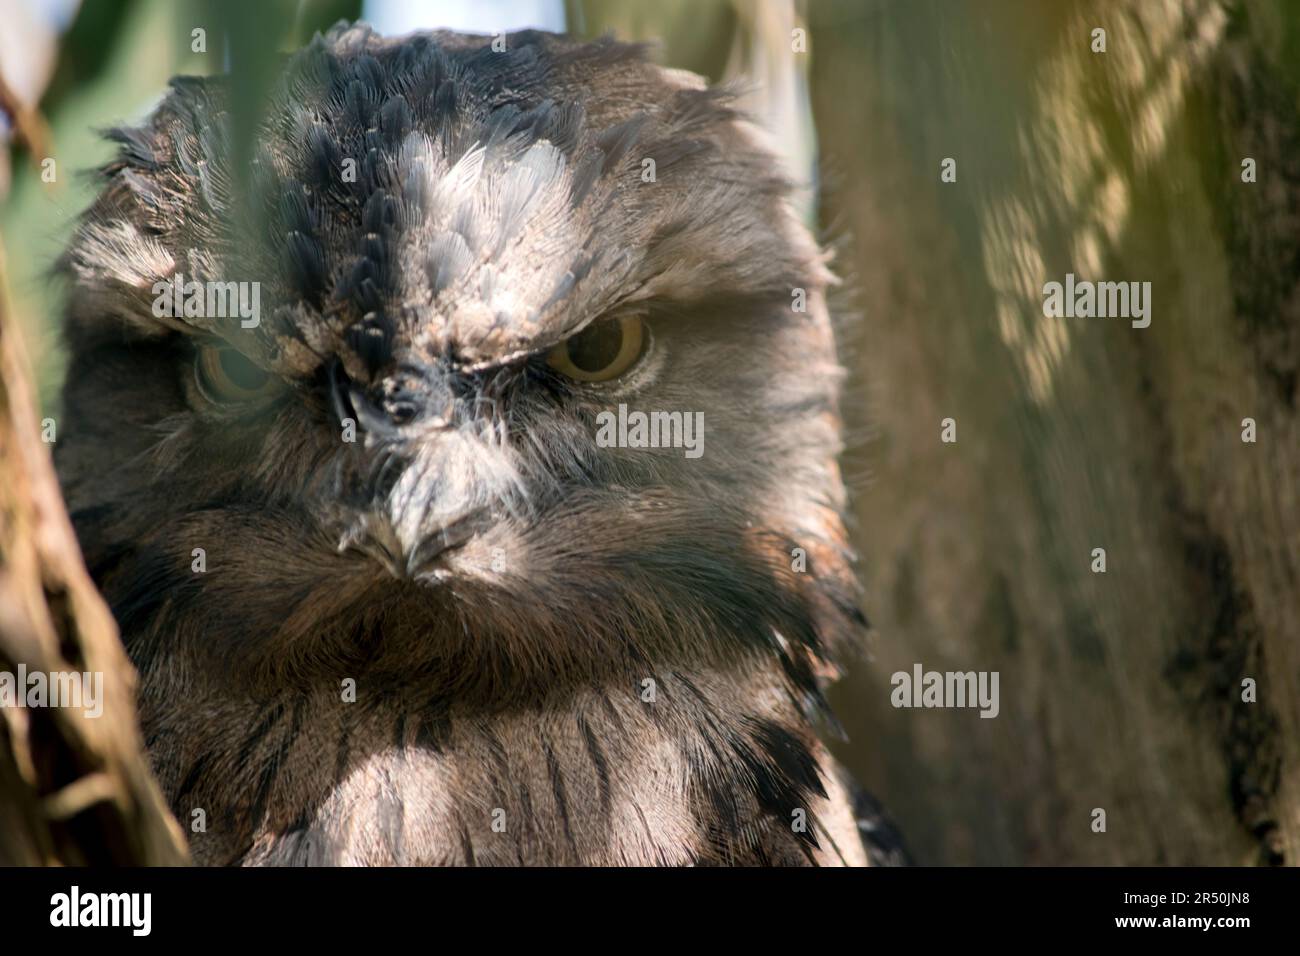 Tawny frogmouths have greyish feathers, lighter below, streaked with darker grey and some reddish tints. Their large eyes have a yellow iris, and the Stock Photo